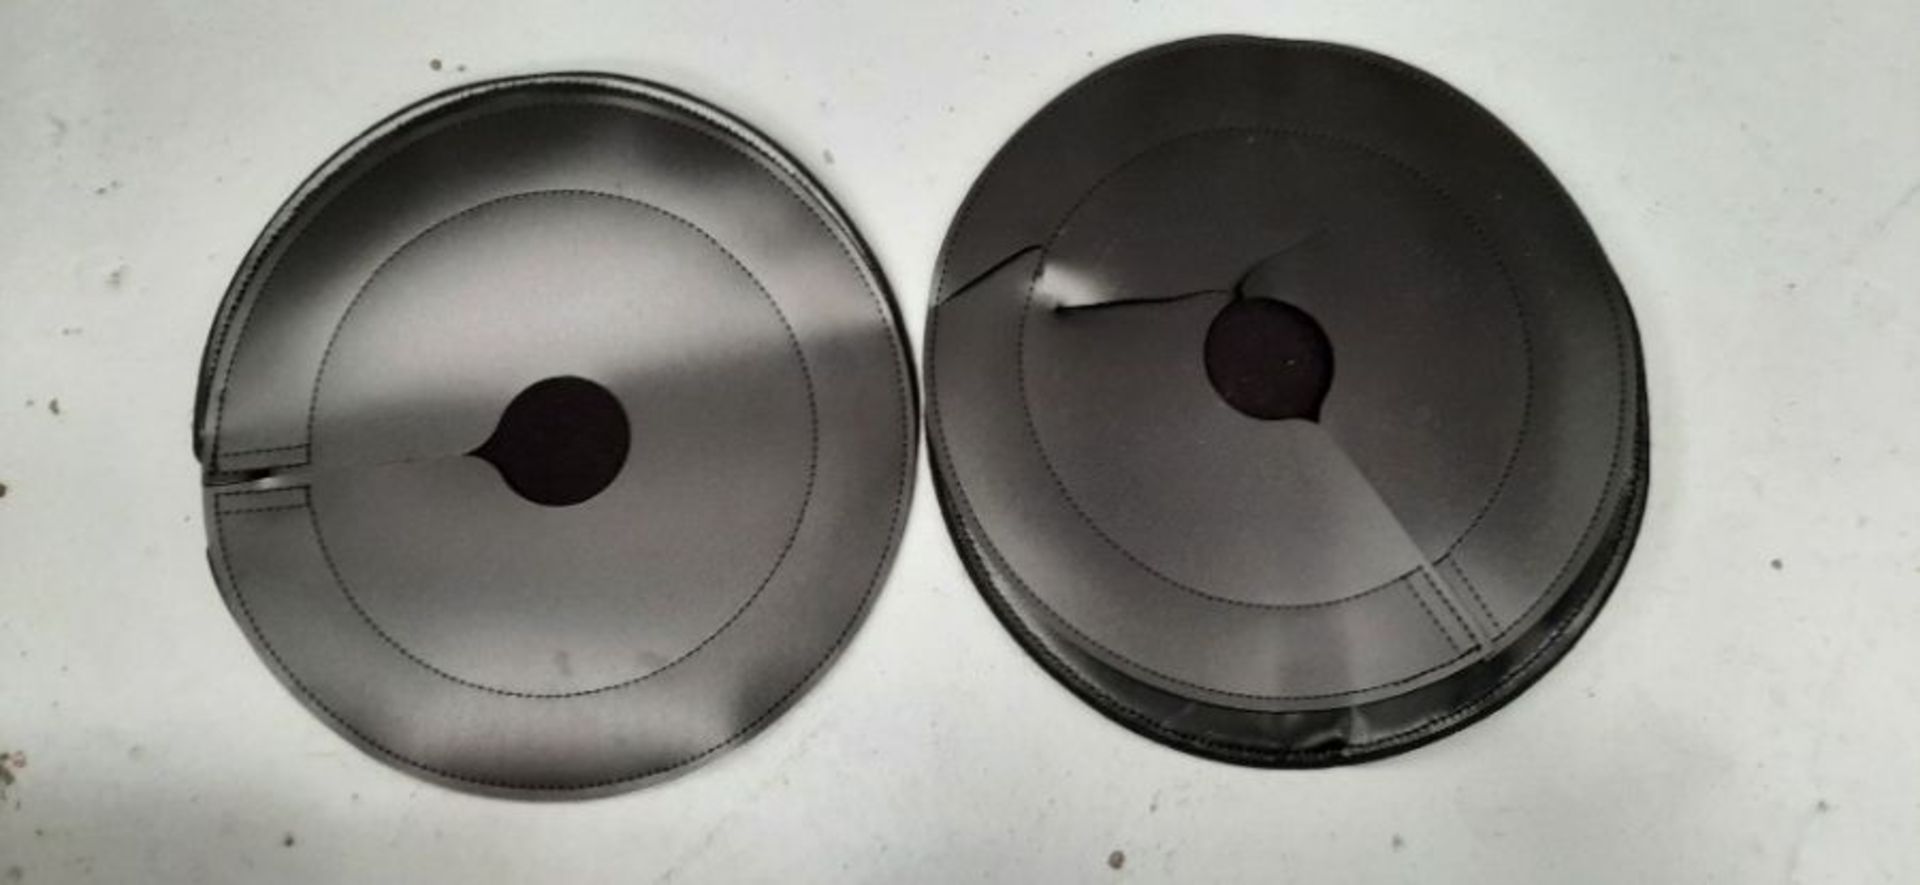 Muc-Off Bolt Disc Brake Covers, Set of 2 - Washable Neoprene Protective Covers for Bic - Image 4 of 4